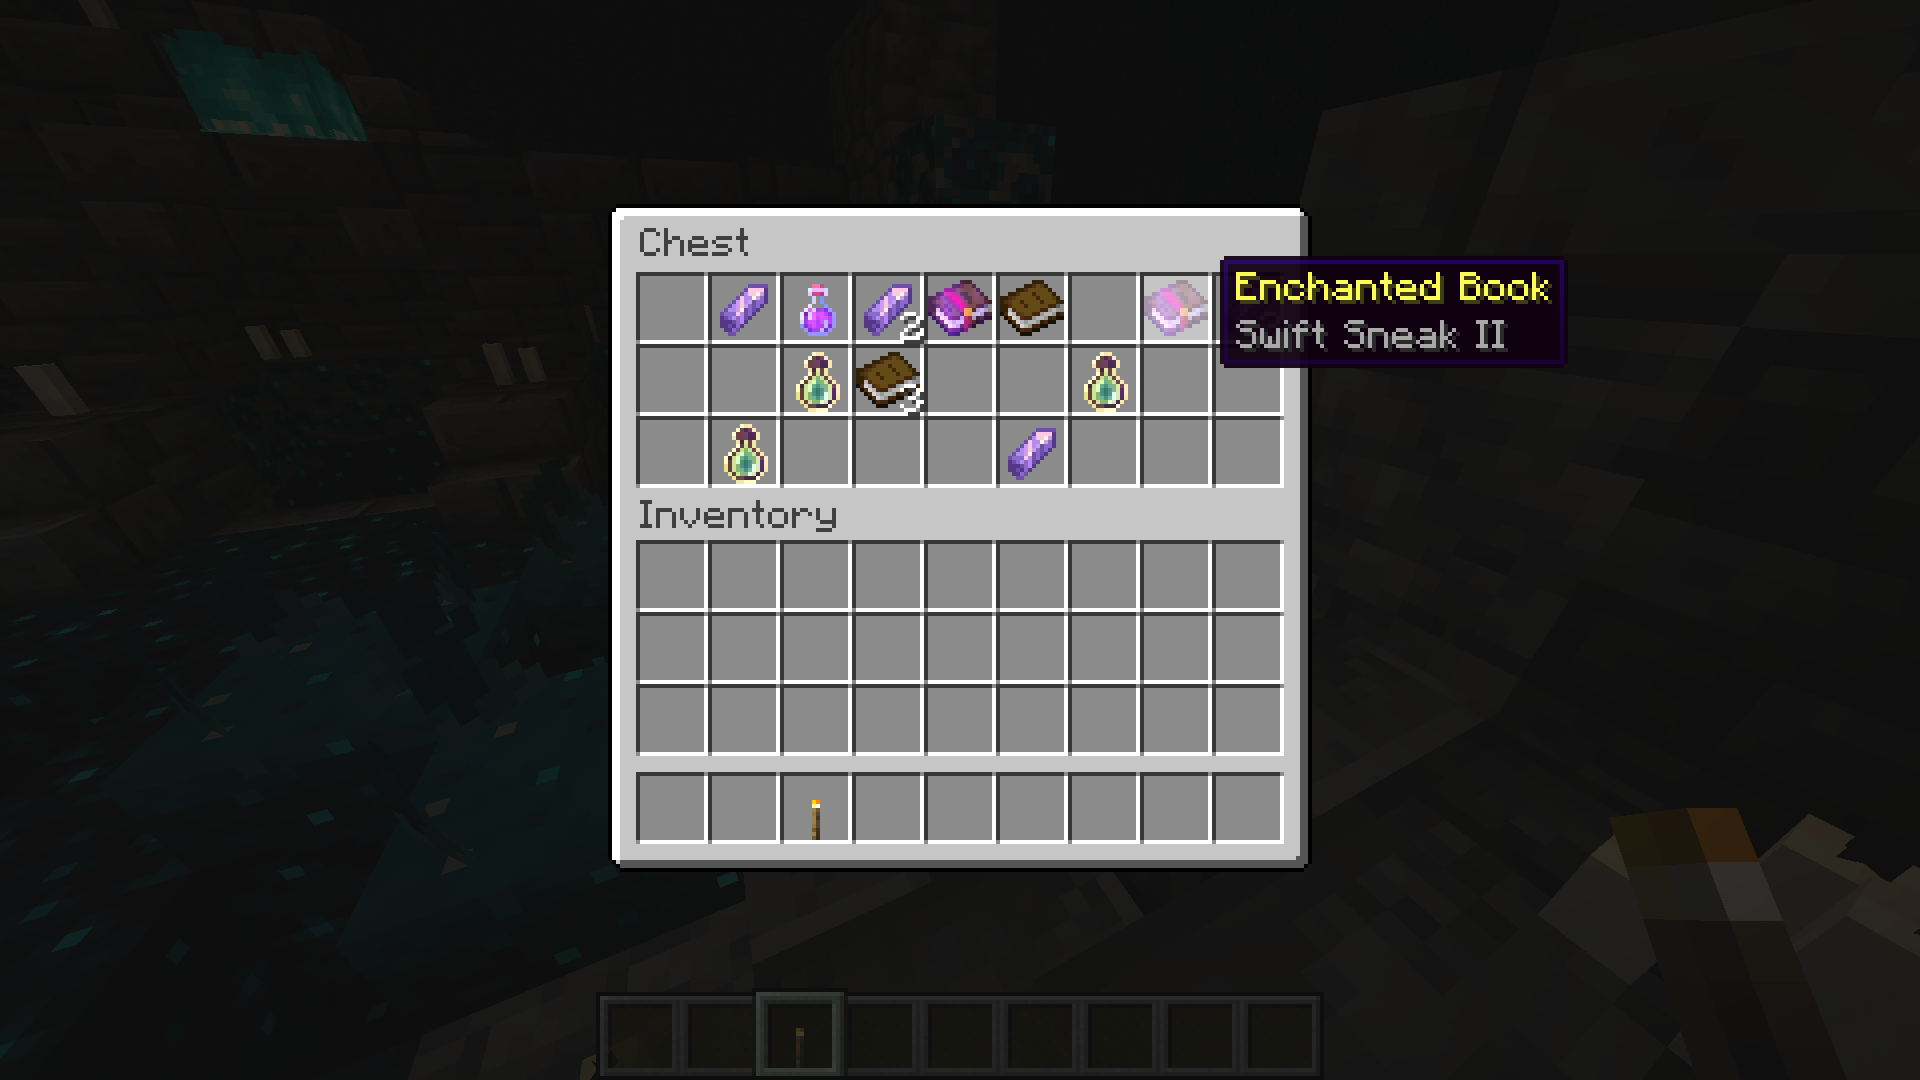 Minecraft Chest With Swift Sneak Enchanted Book